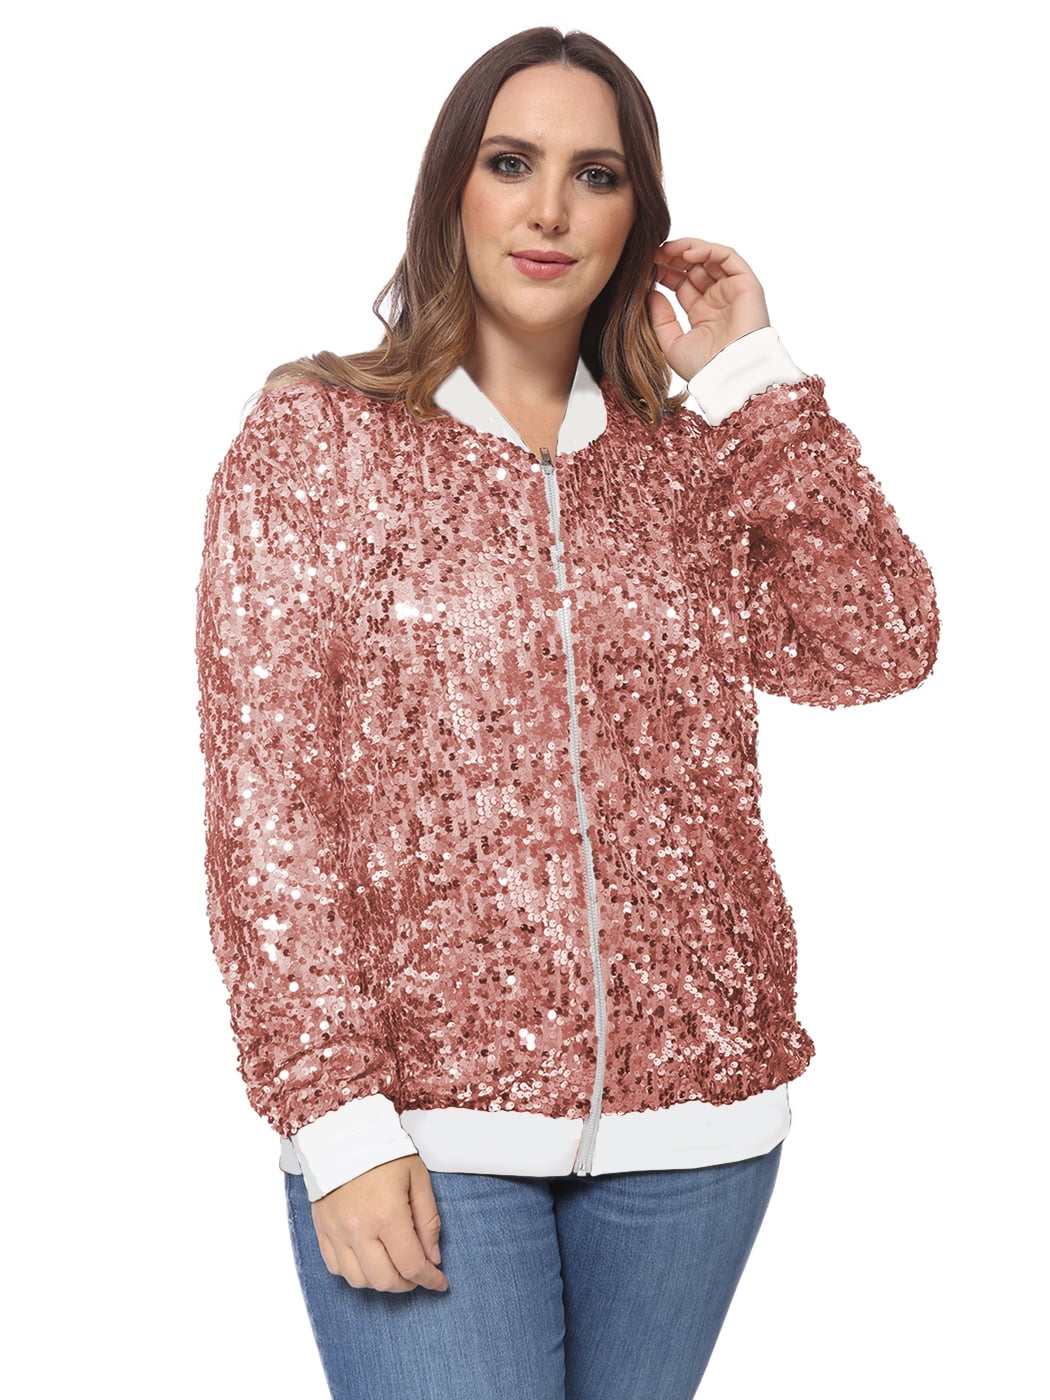 Plus Size Light Pink / Royal Sequin Jersey OSFM Size XL-3XL Jack and Jill  of America 